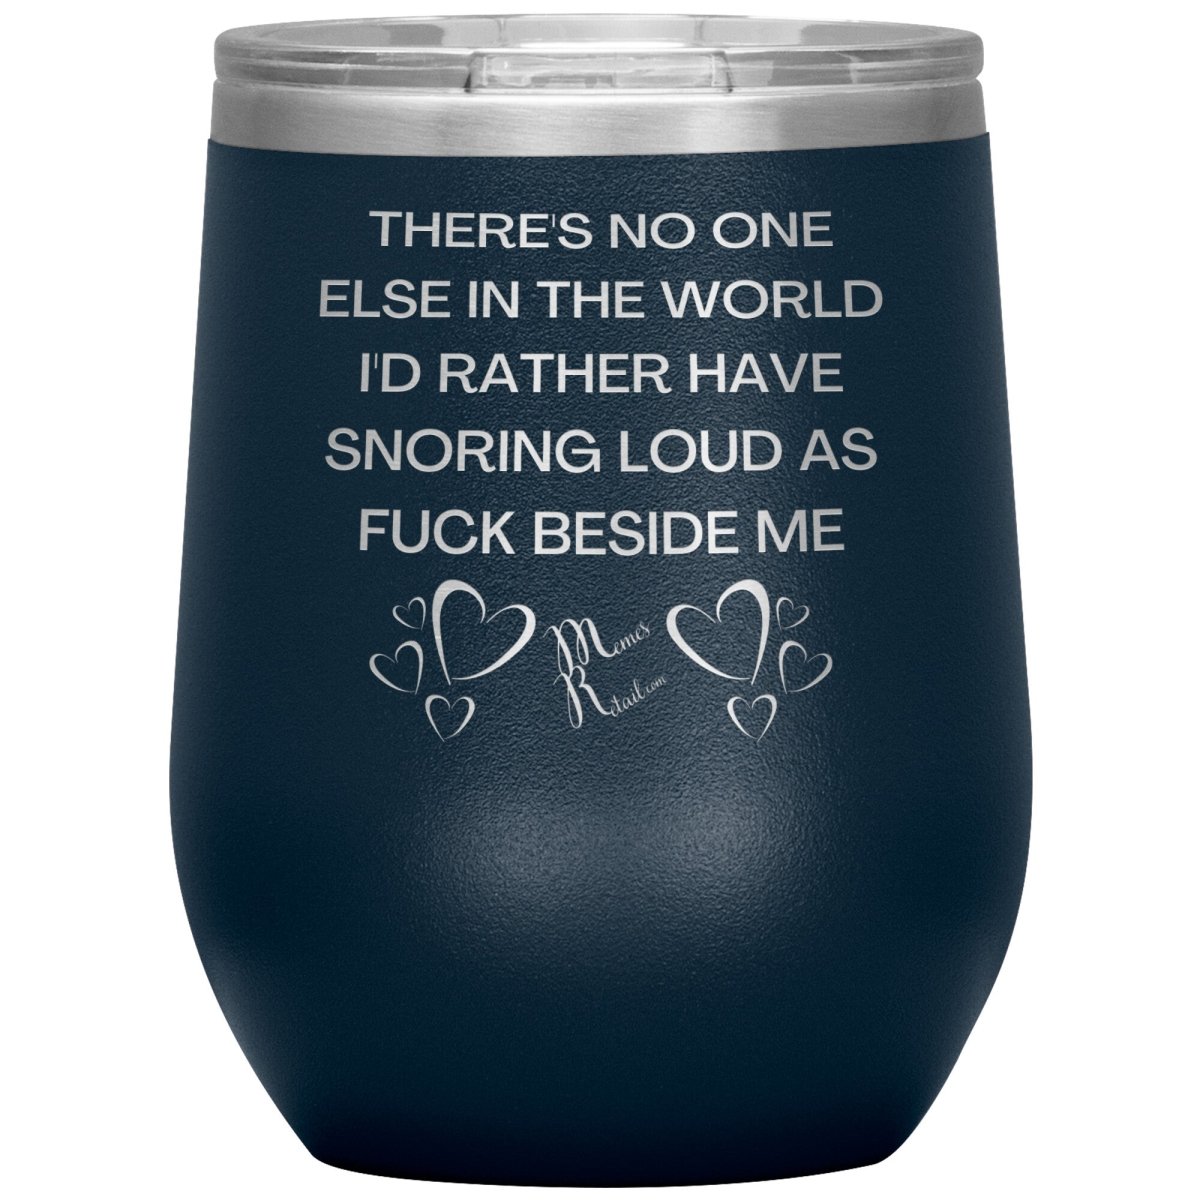 There's No One Else in the World I'd Rather Have Snoring Loud, 12oz Wine Insulated Tumbler / Navy - MemesRetail.com